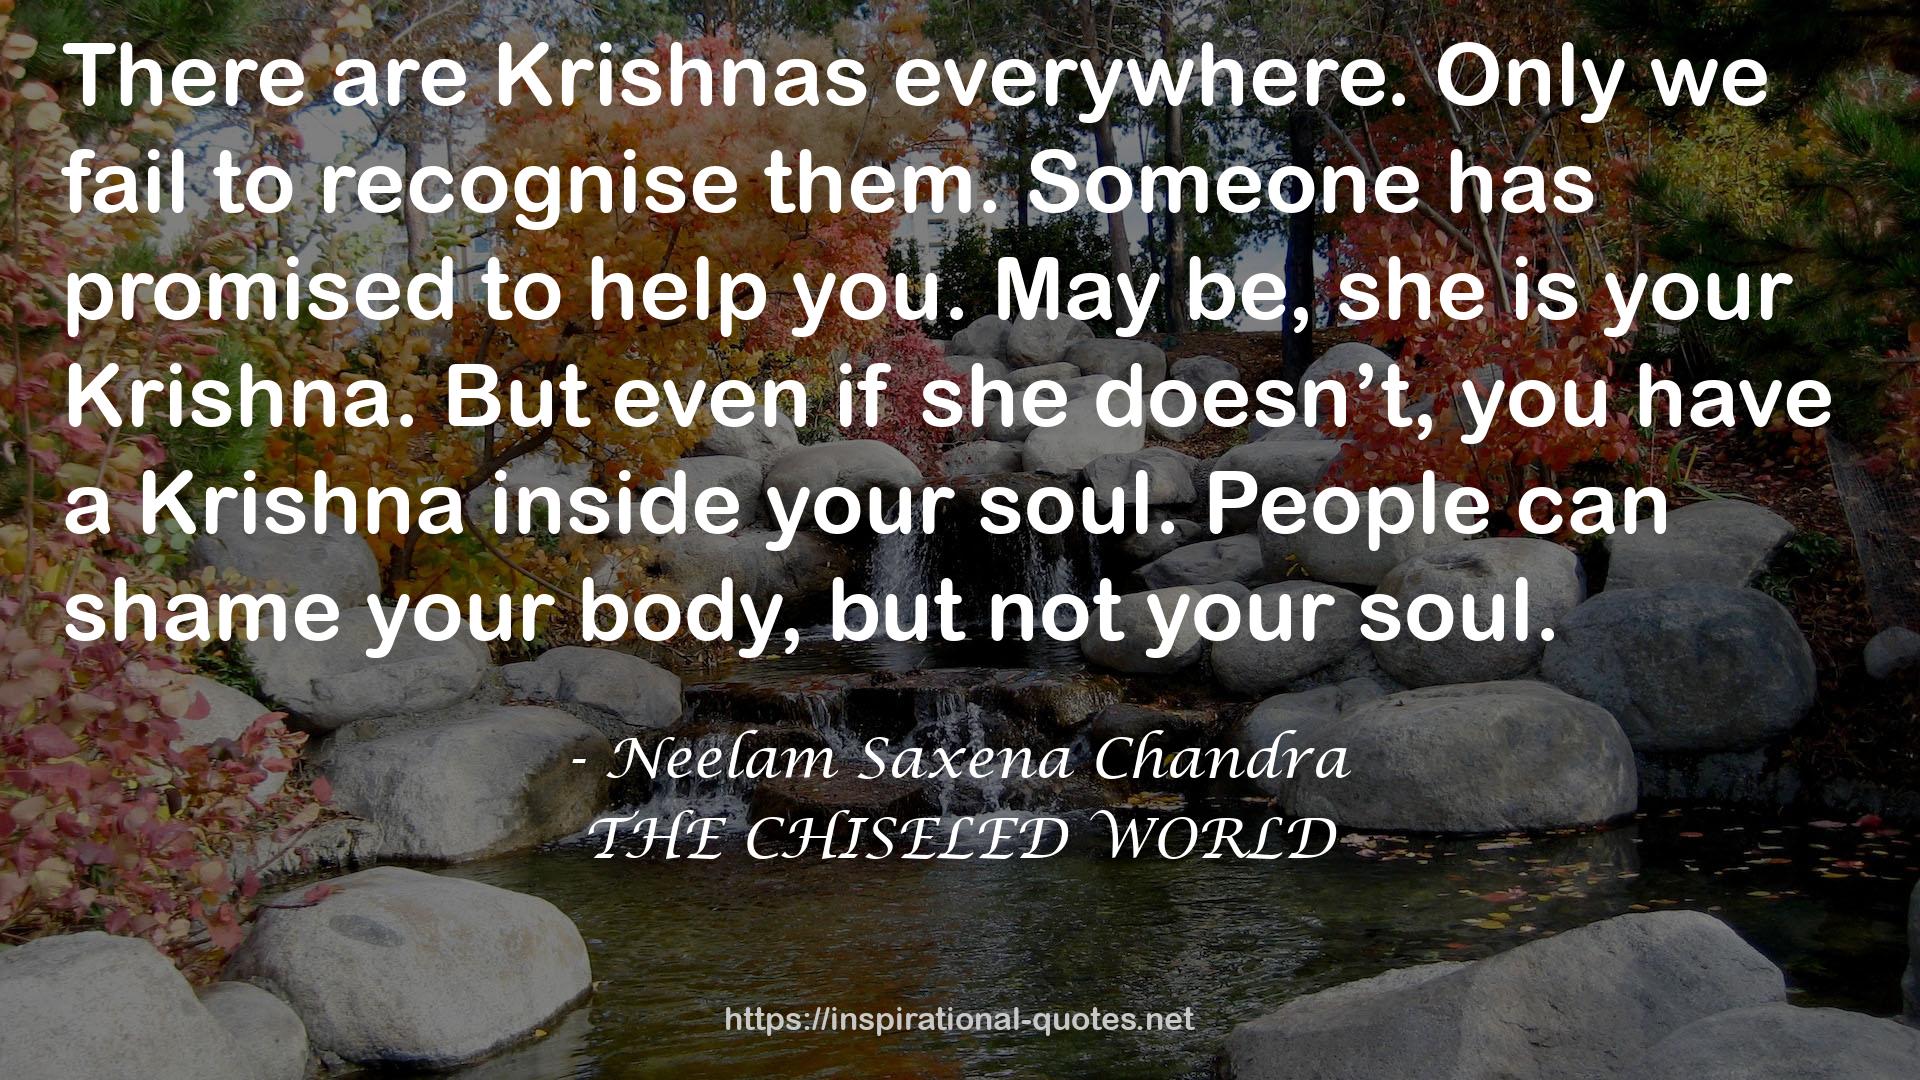 THE CHISELED WORLD QUOTES